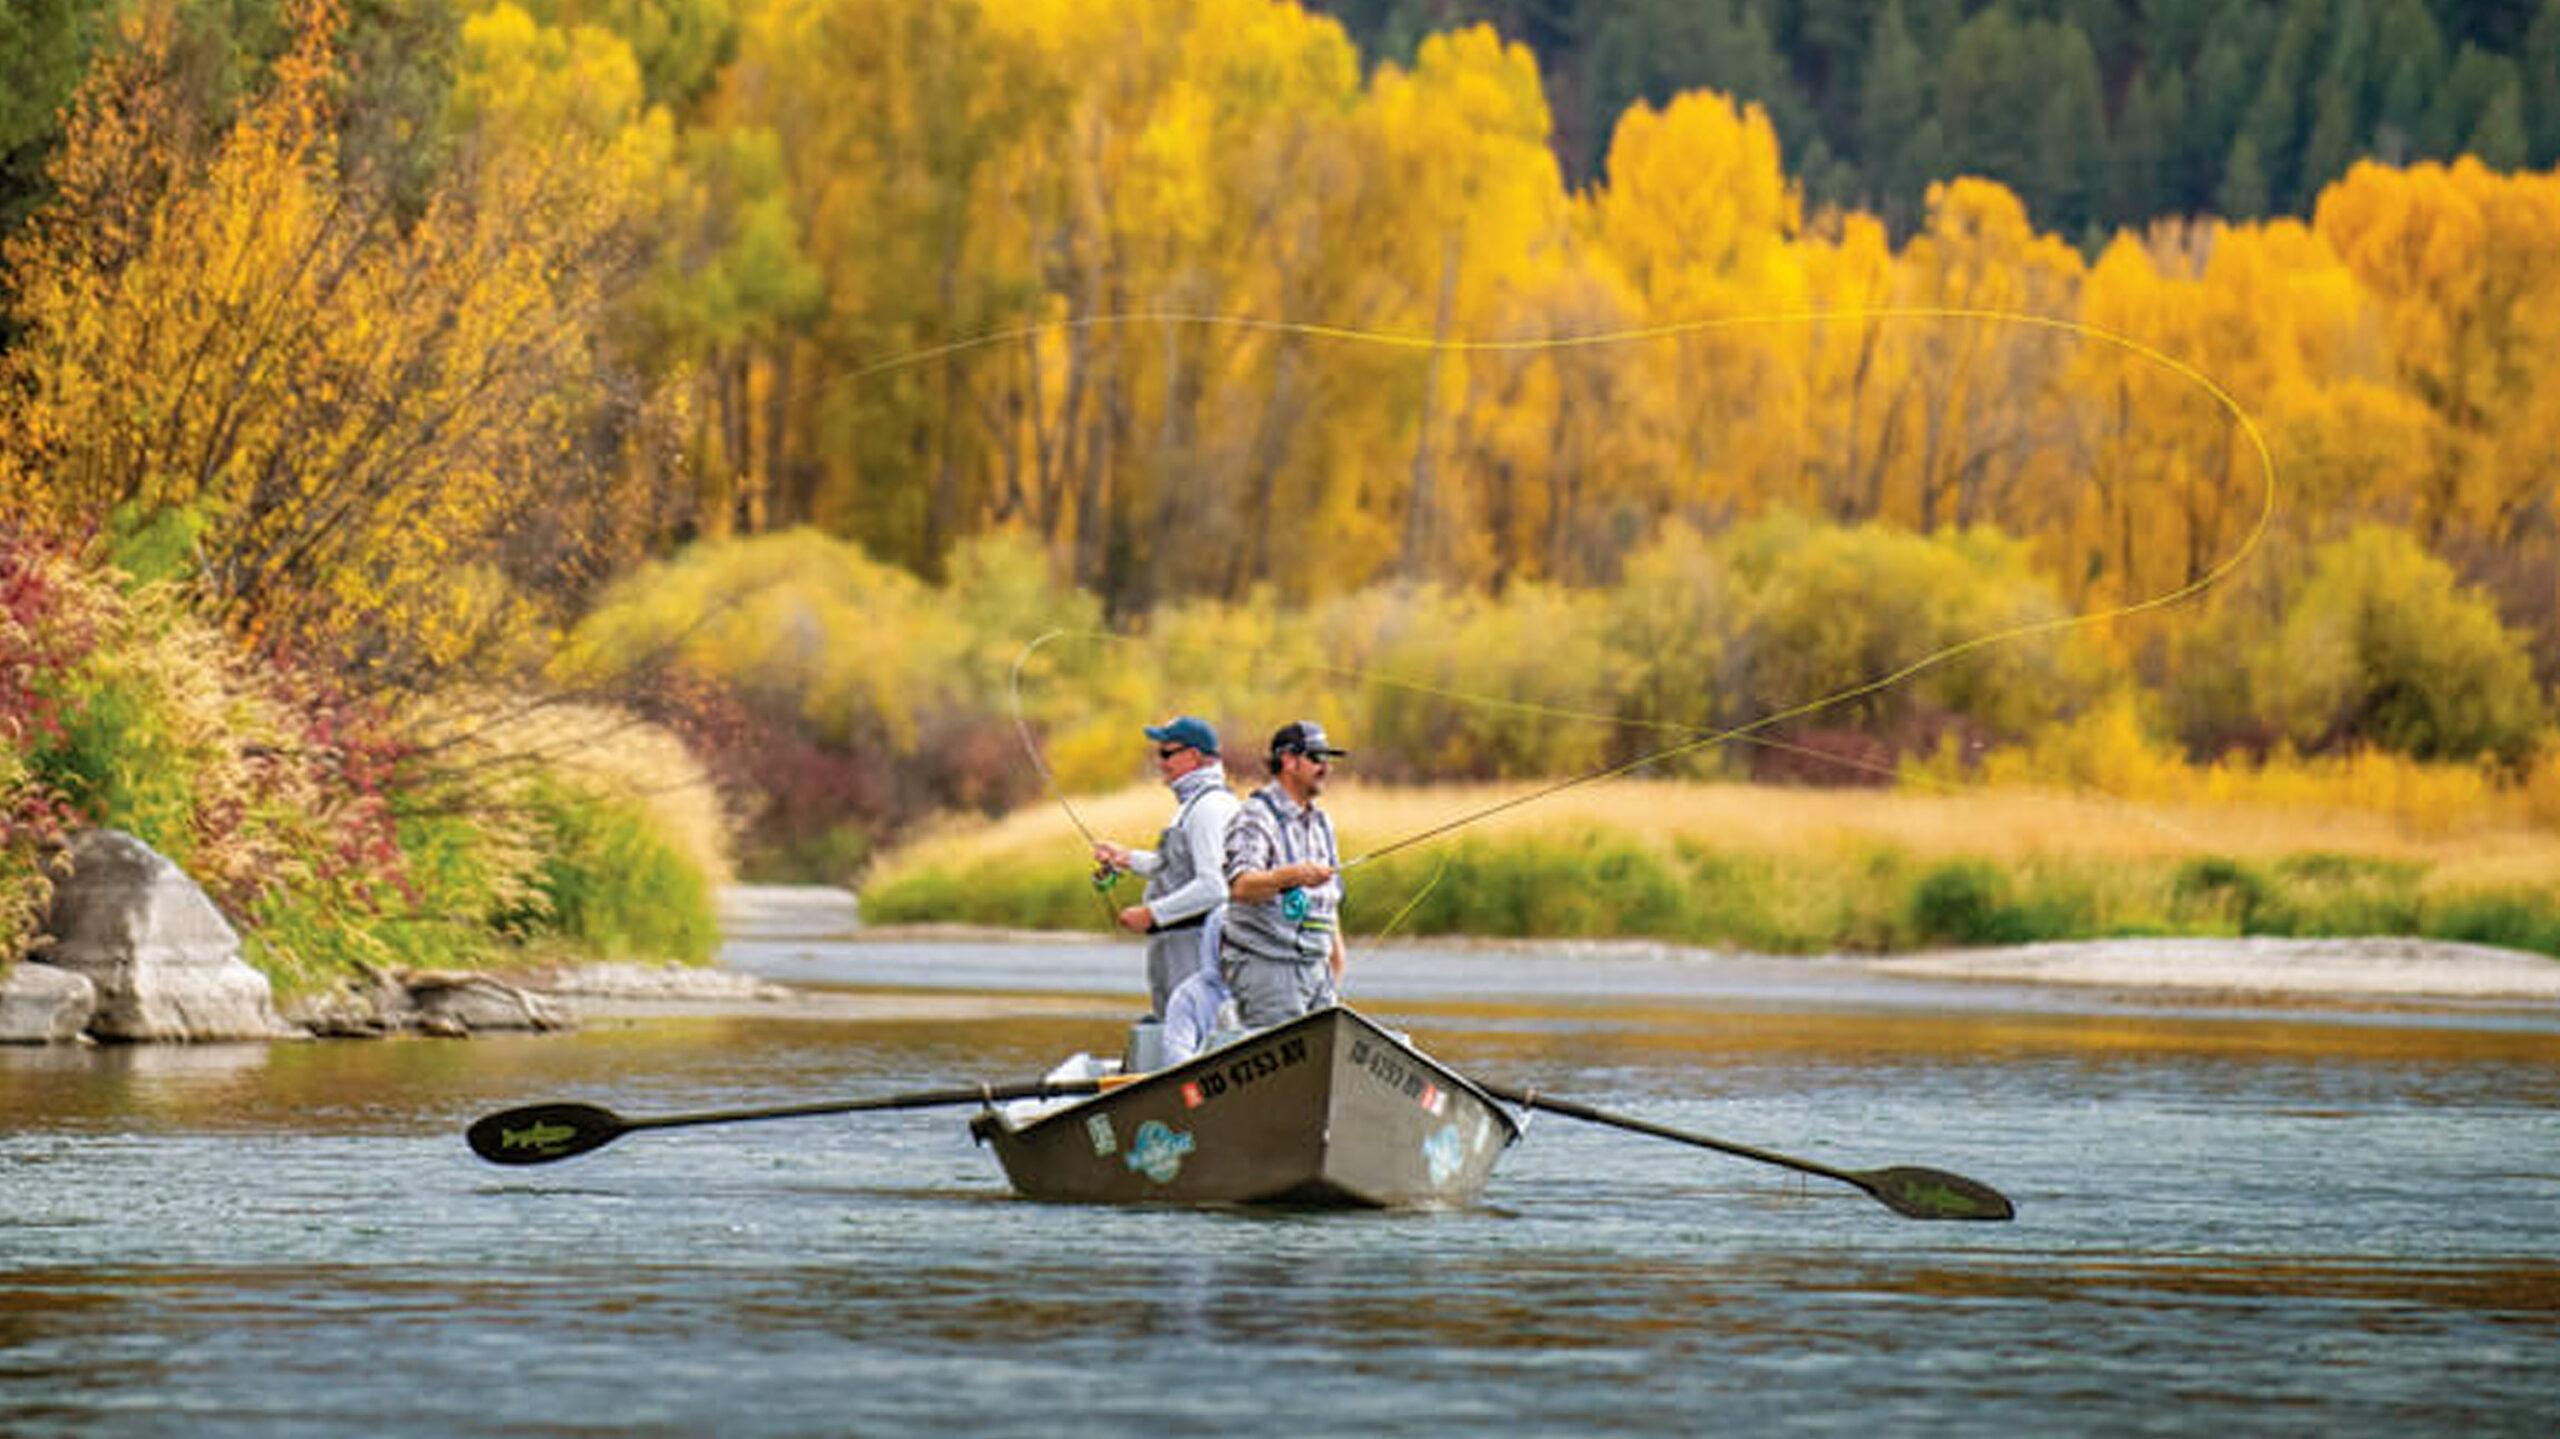 South Fork Fly Fishing Guide with Angler on Boat During Cast and Blast Trip